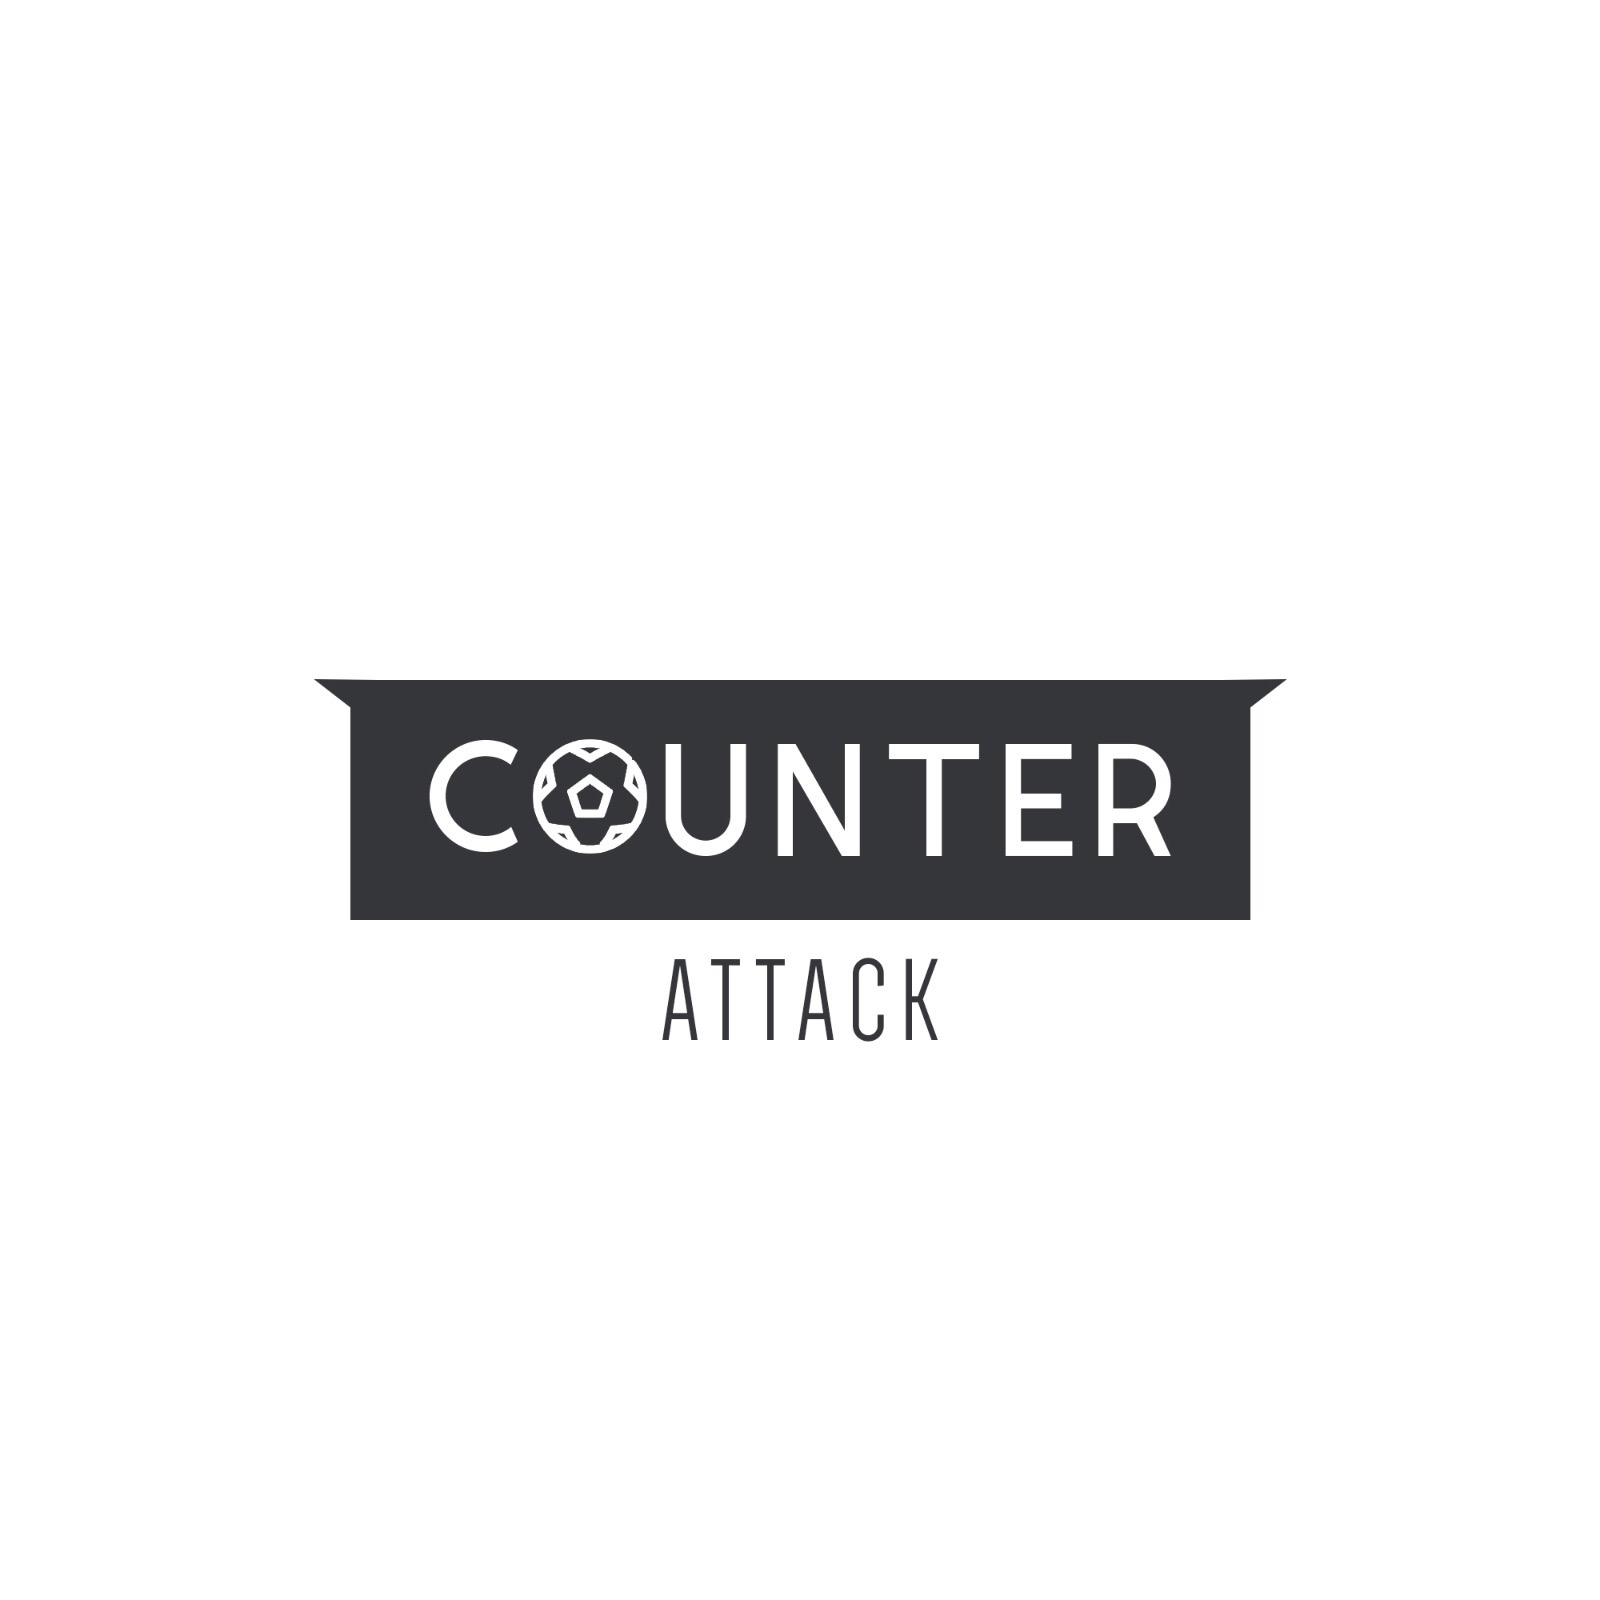 Counter Attack - Episode 166 -1000 and out for Bruce!